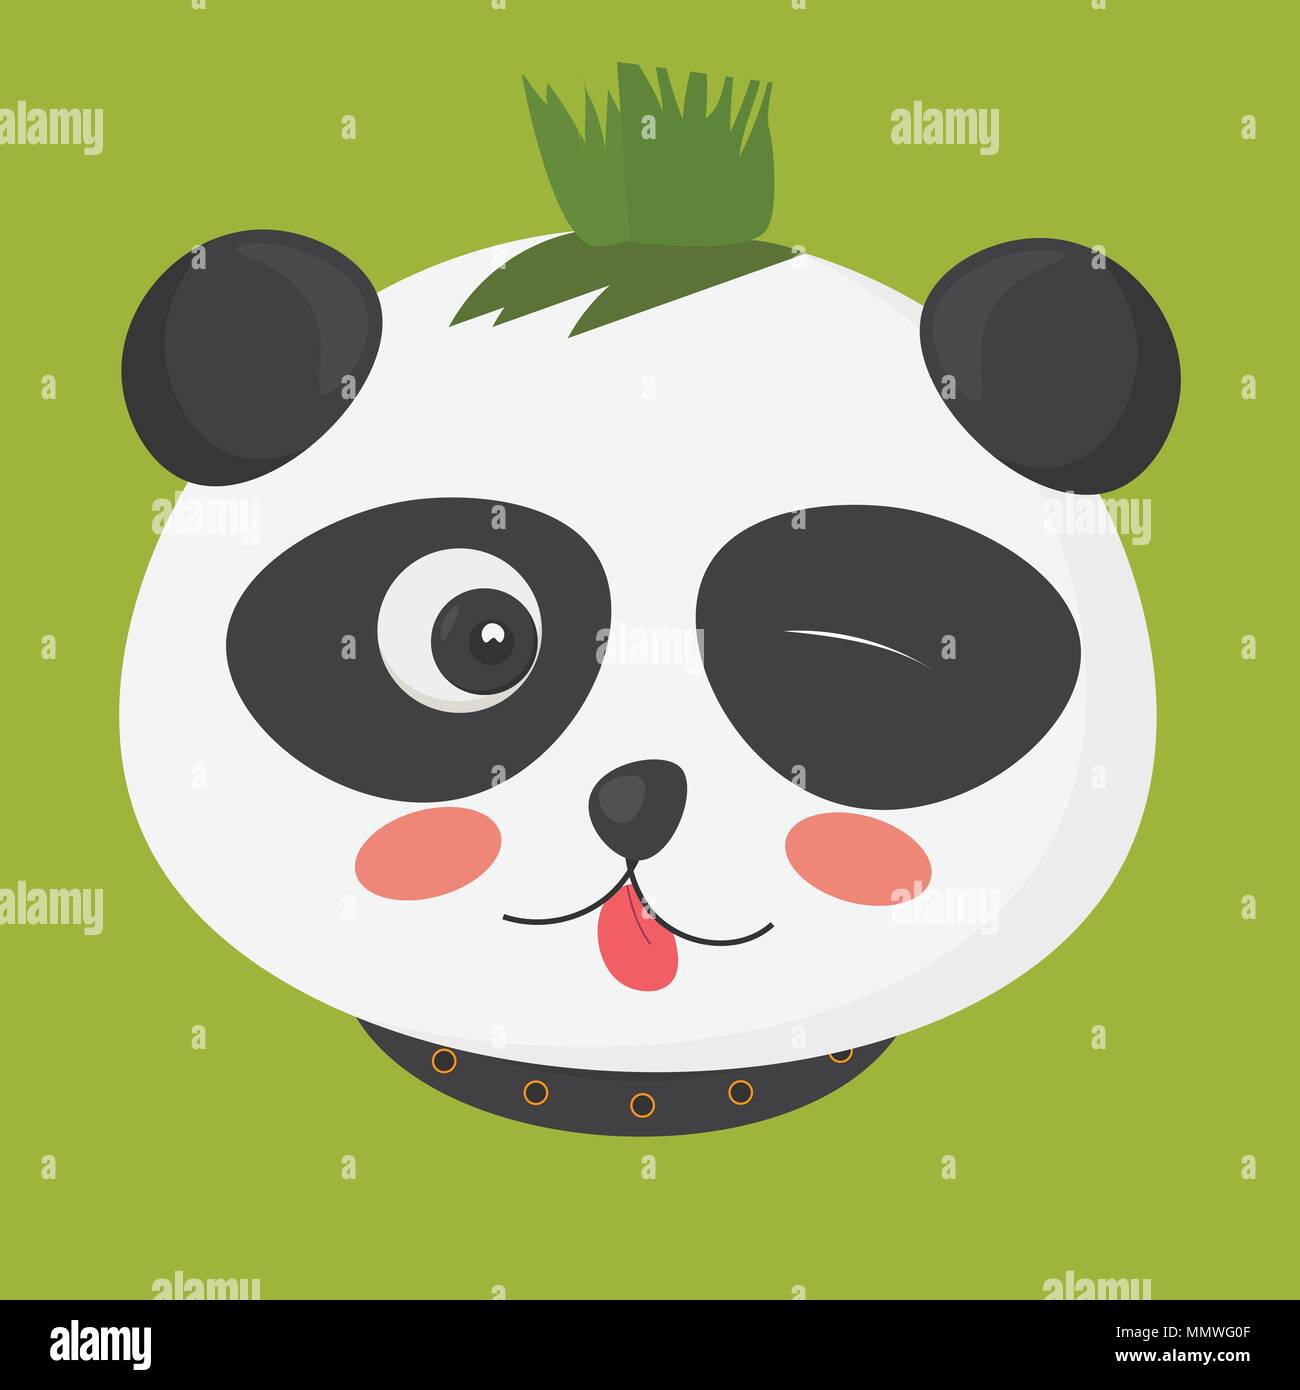 Vector illustration: punk panda character made in a cartoon style. Stock Vector